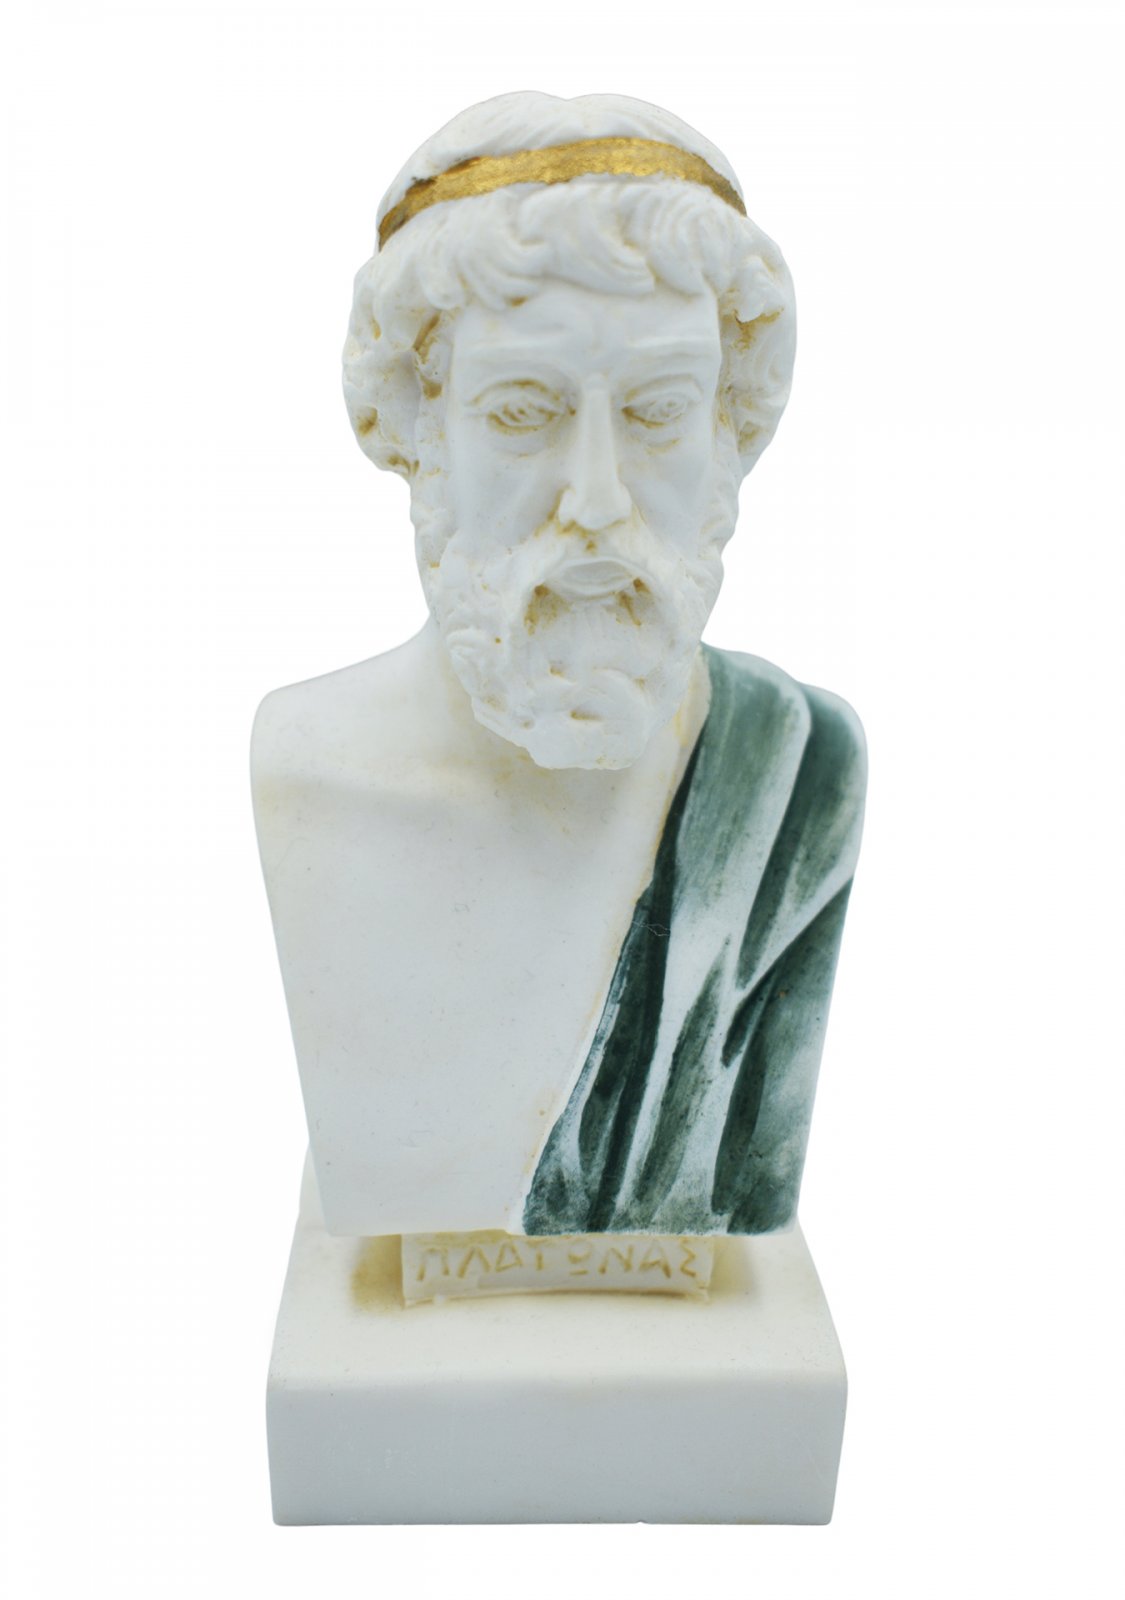 Plato greek alabaster bust statue with color and patina